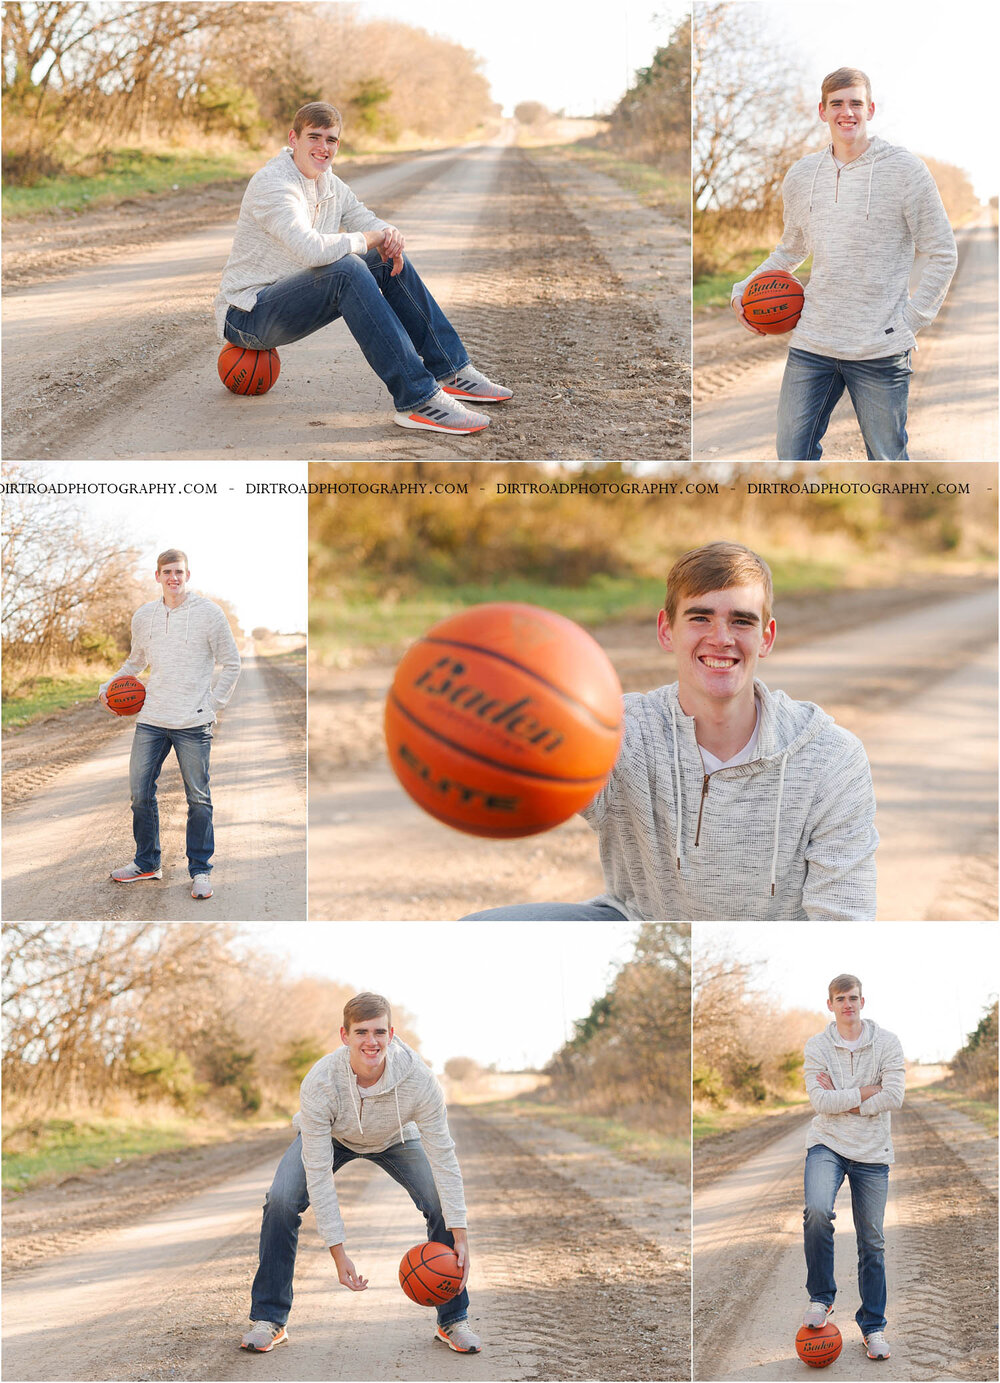 images of high school senior boy named kaleb of palmyra, nebraska. he attends palmyra high school and is part of the class of 2020. photos of teen in bale feeder on farm, round tall hay bales, fall leaves, dirt road with basketball in hand at sunset in nebraska. boy is dressed in cream zip up, green striped shirt with hood and blue jeans. senior is also standing by grain bin and in front of red barn as well as sitting on iron fence with cattle in the background of the feedlot. photographer is kelsey homolka nerud of wilber nebraska who specializes in high school senior photography and senior pictures.